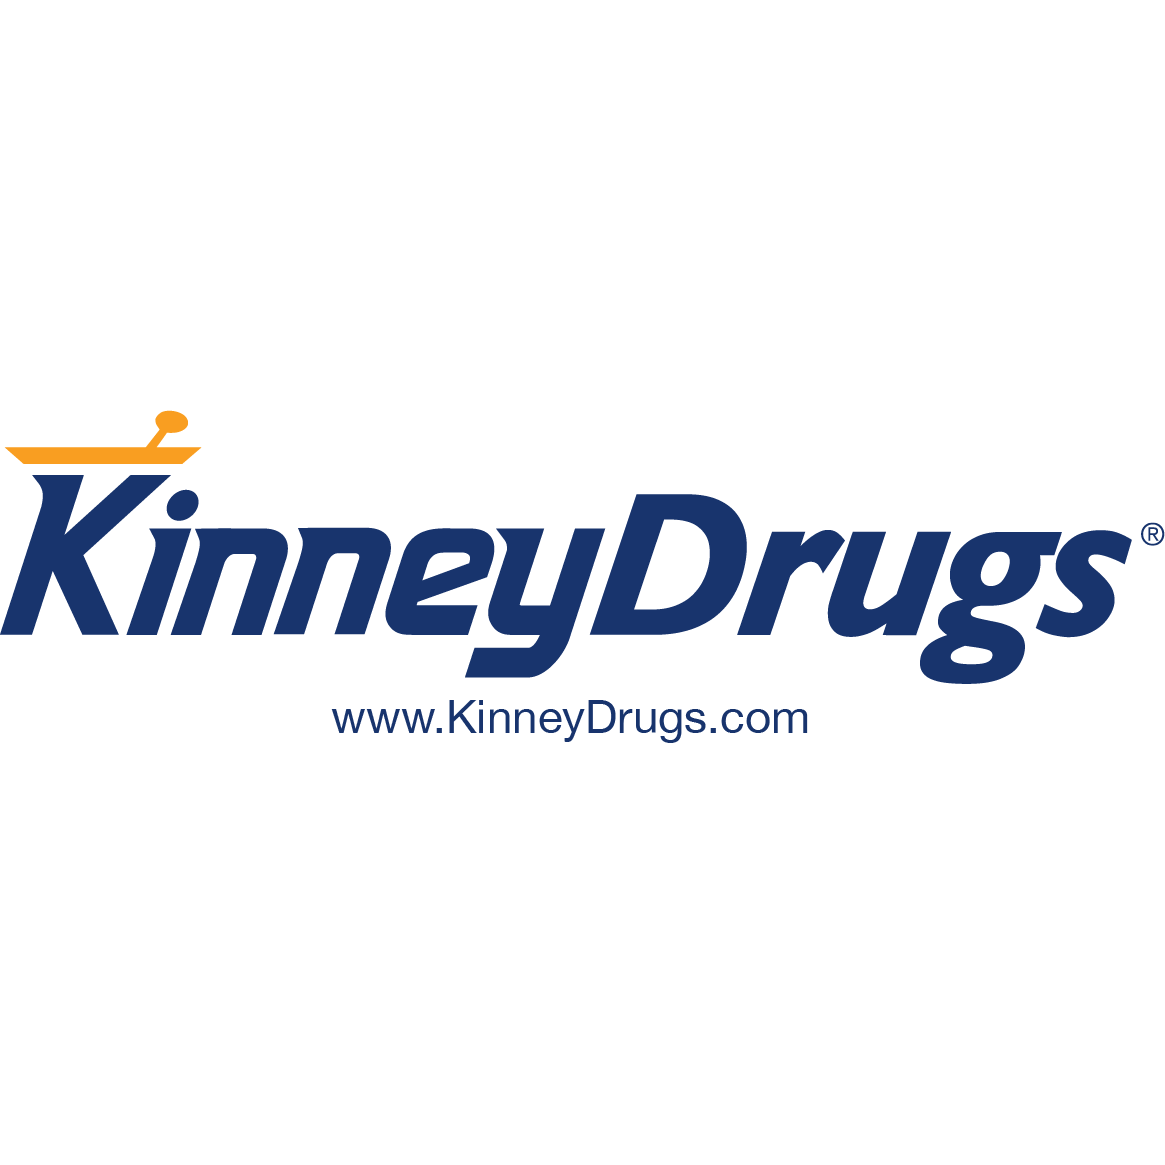 Kinney Drugs | Employee-owned. Locally committed. Since 1903. Kinney Drugs Lowville (315)302-5466